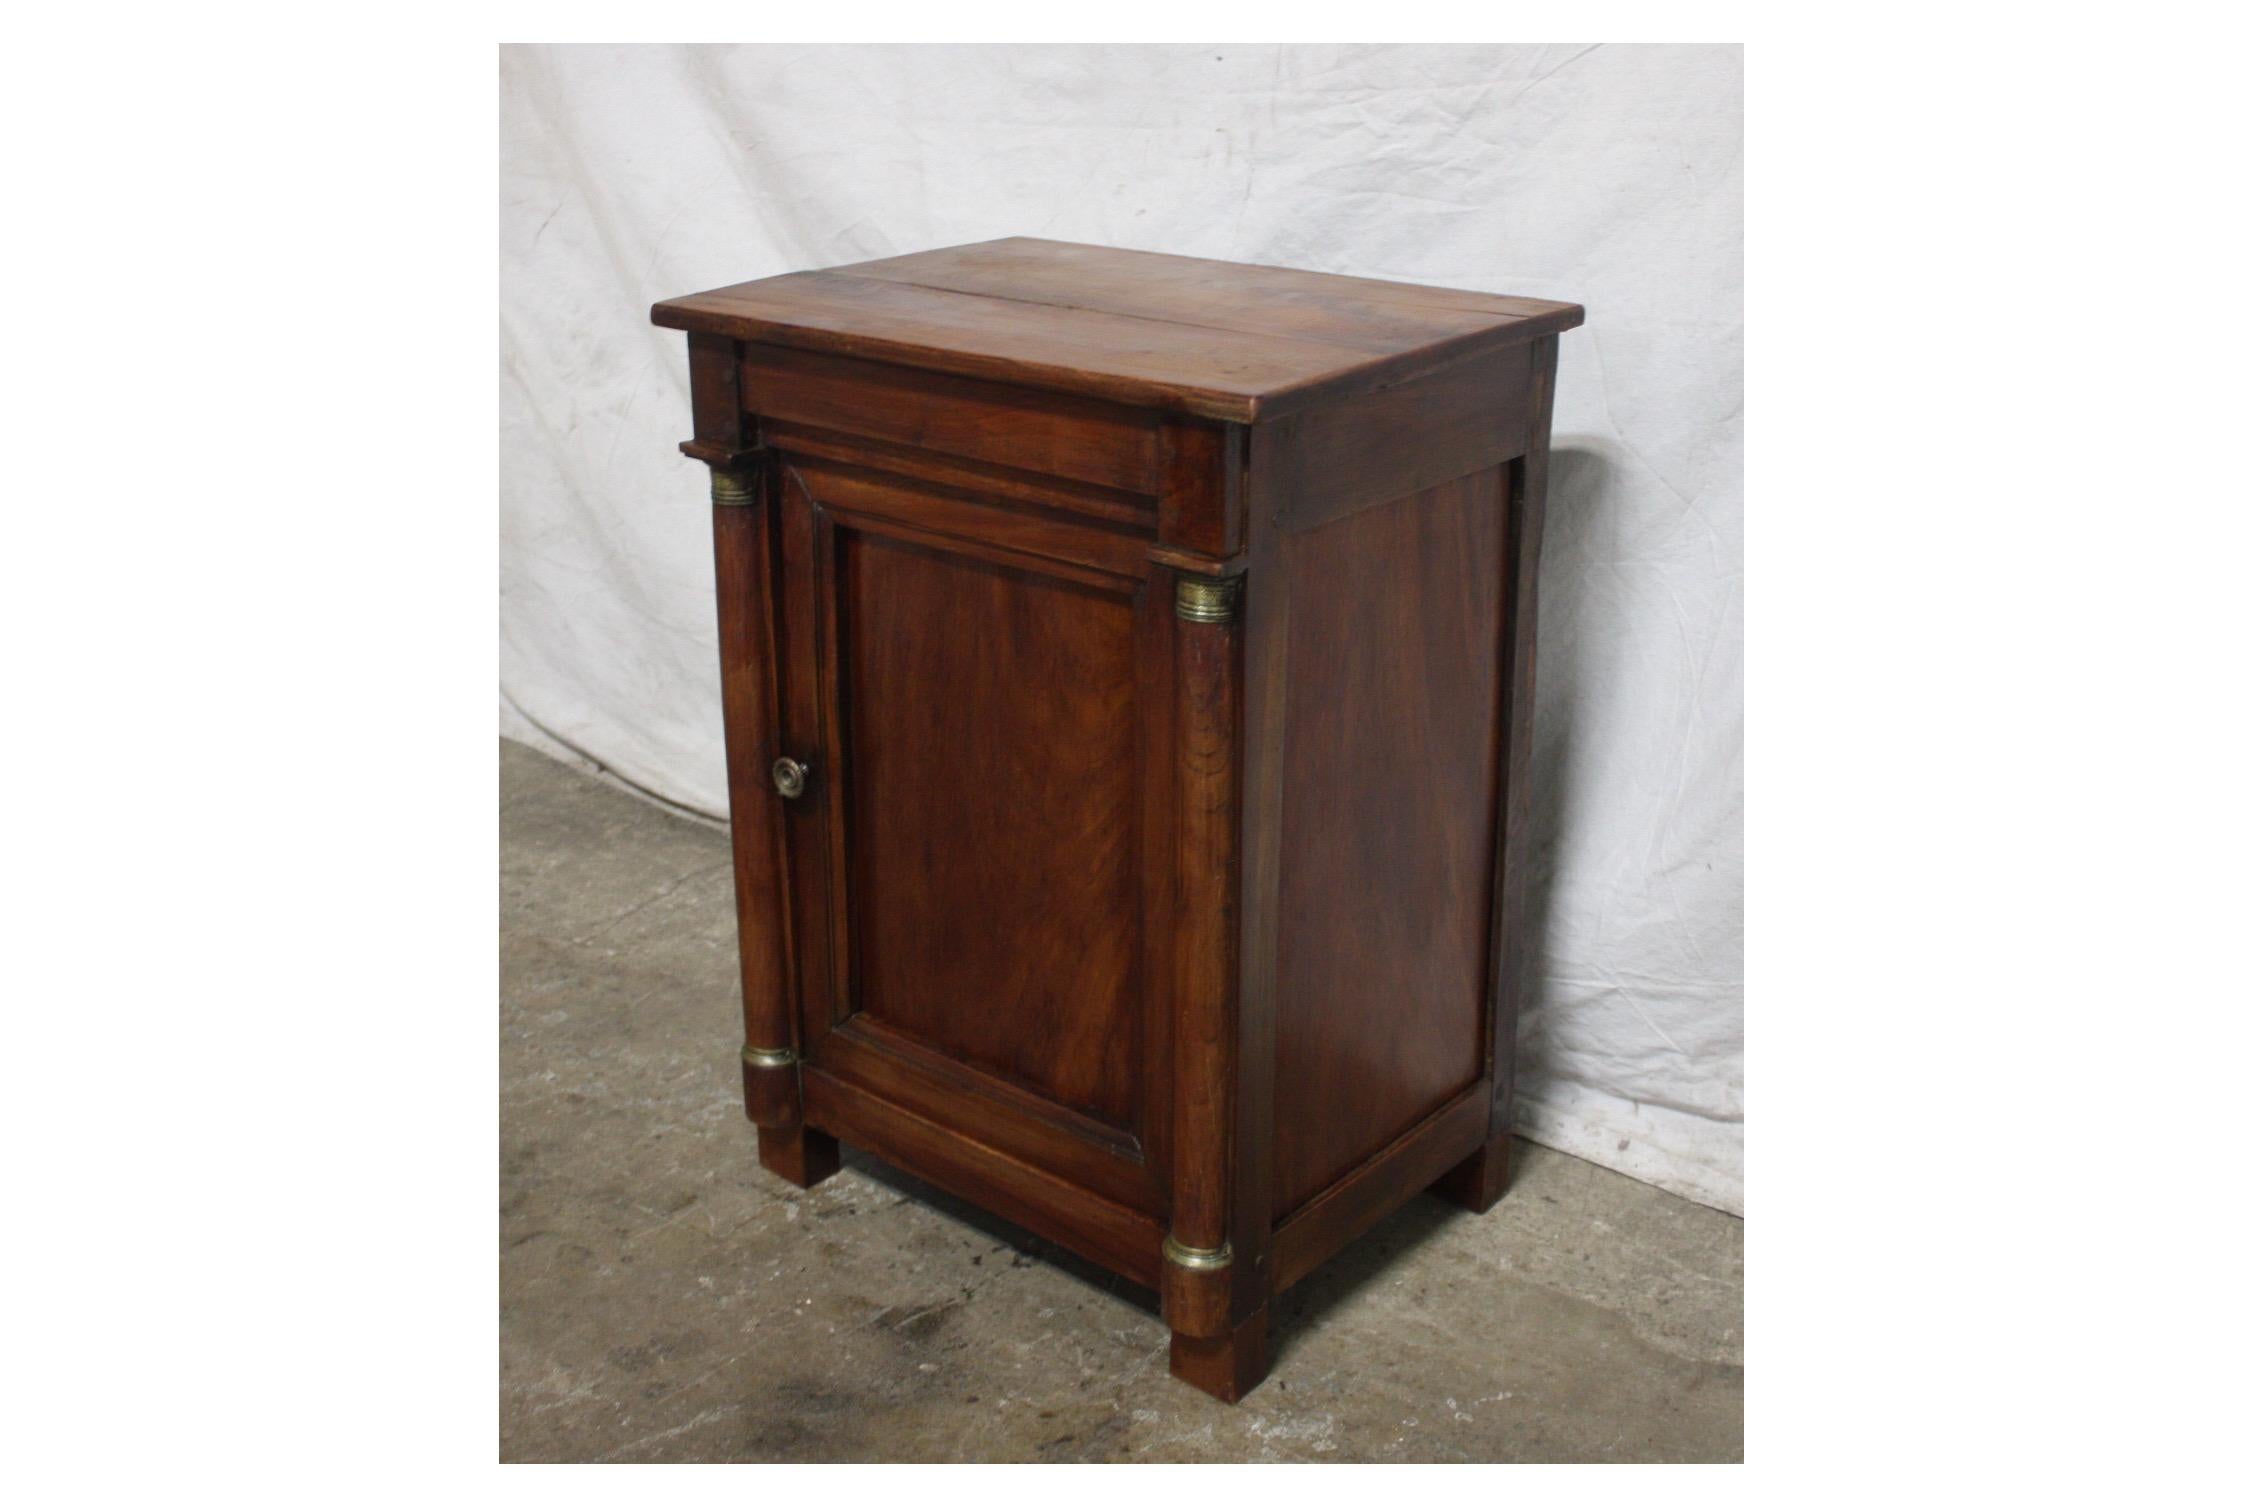 French Empire small cabinet.